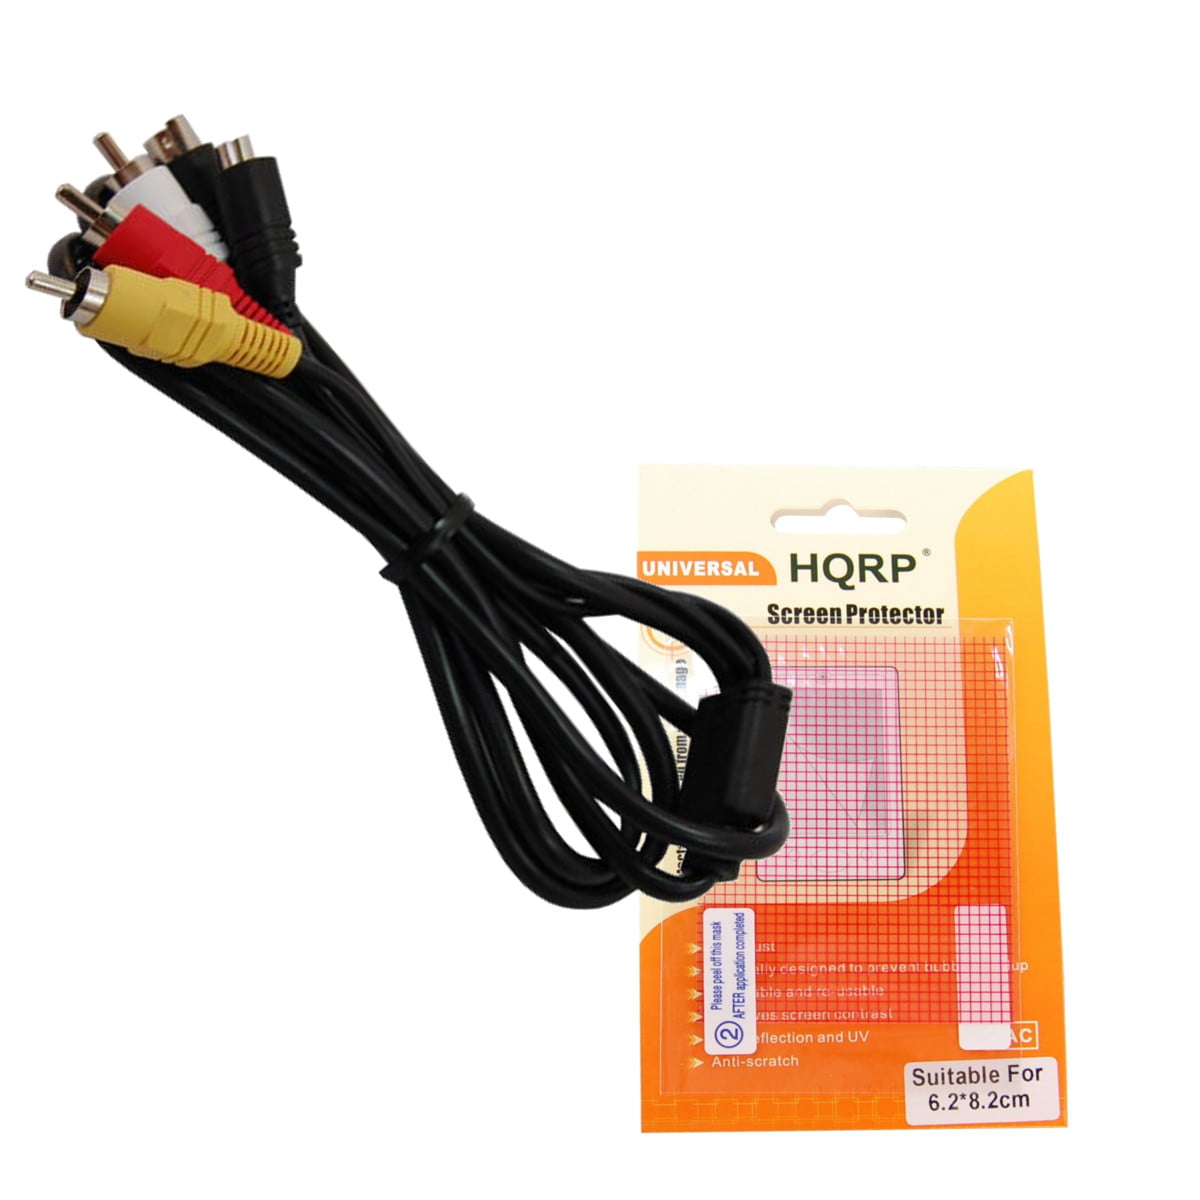 HQRP 3.5mm to 3 RCA Audio Video Cable Cord for SONY DCR-TRV280 DCR-VX2100 Camcorder HQRP LCD Screen Protector